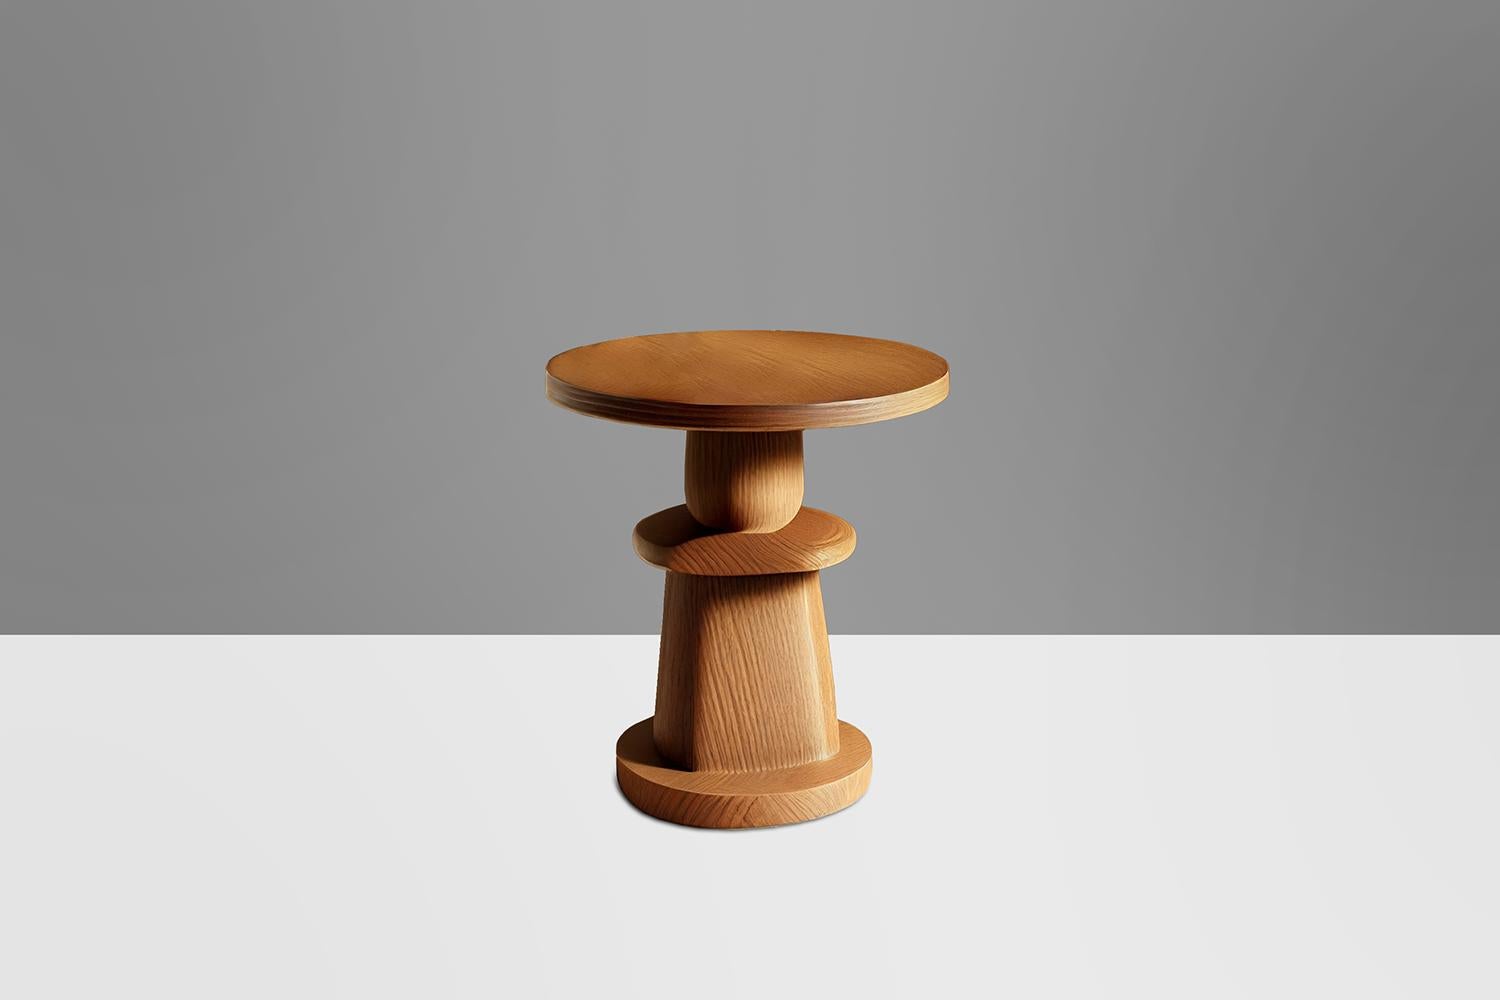 Socle 5 side table, Auxiliary table, Night stand 

Socle is a small solid wood table designed by the NONO design team. Made of solid wood, its elaborated construction serves as a support, much like a plinth for a statue or sculpture.

In the